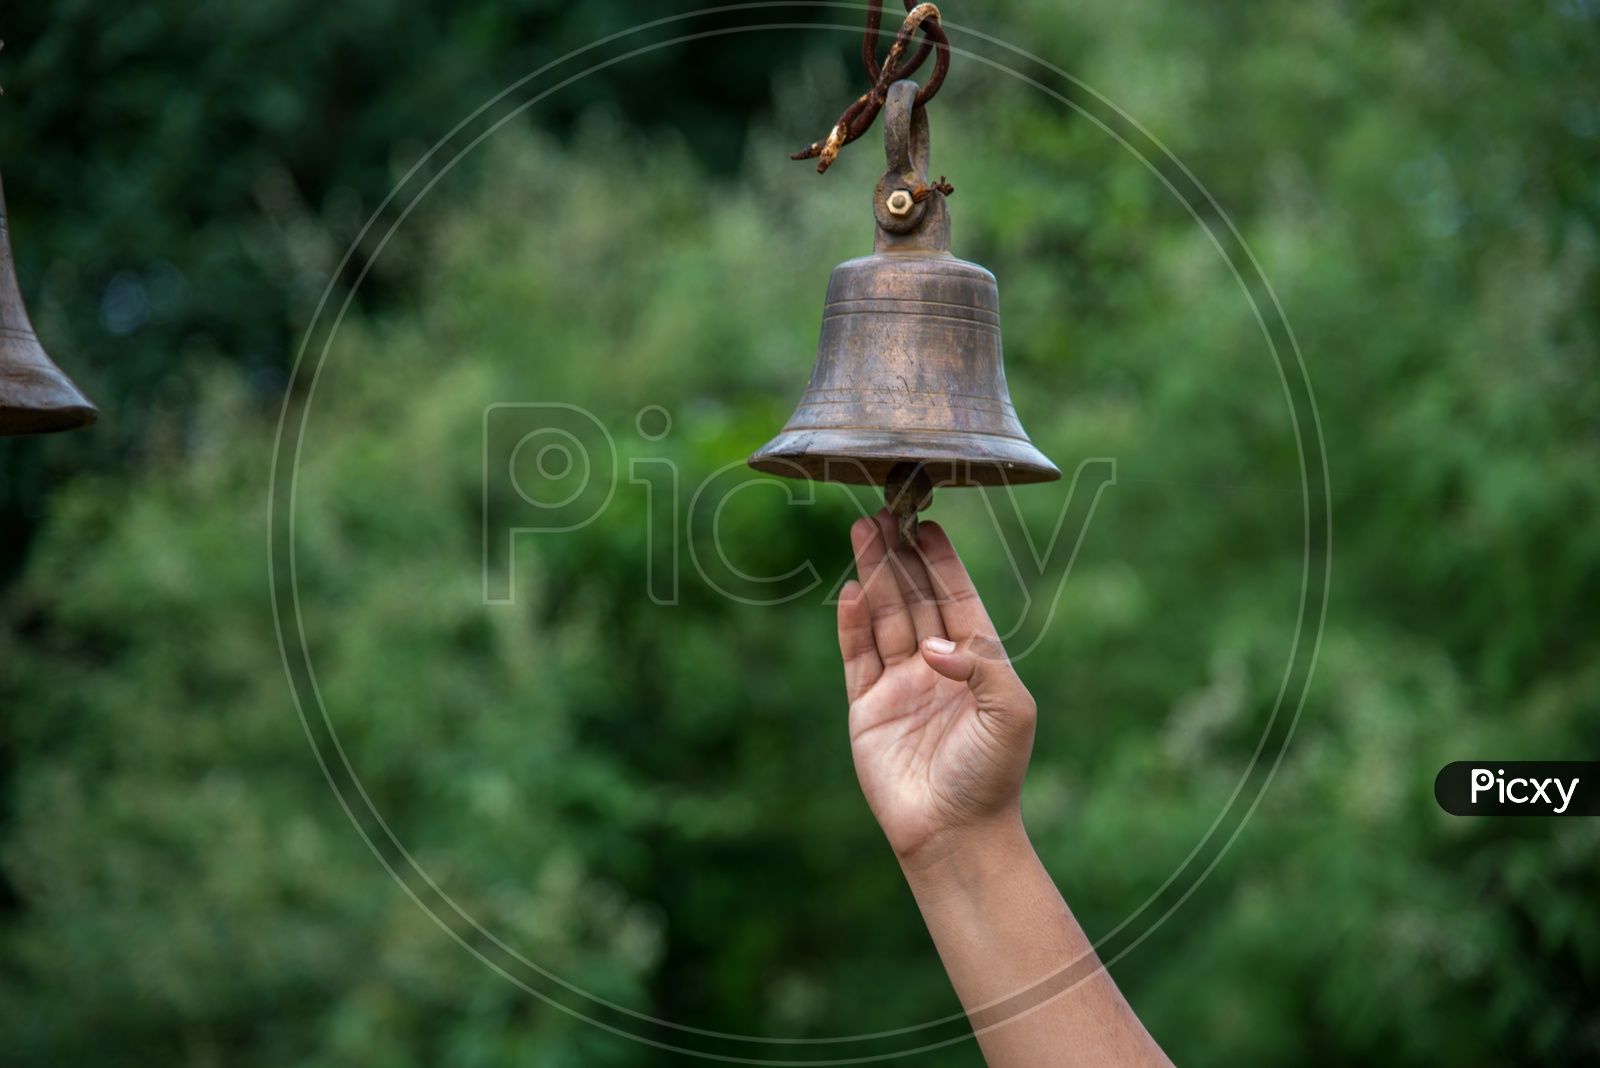 Couples Hand Ringing Temple Bell Stock Photo 626703455 | Shutterstock